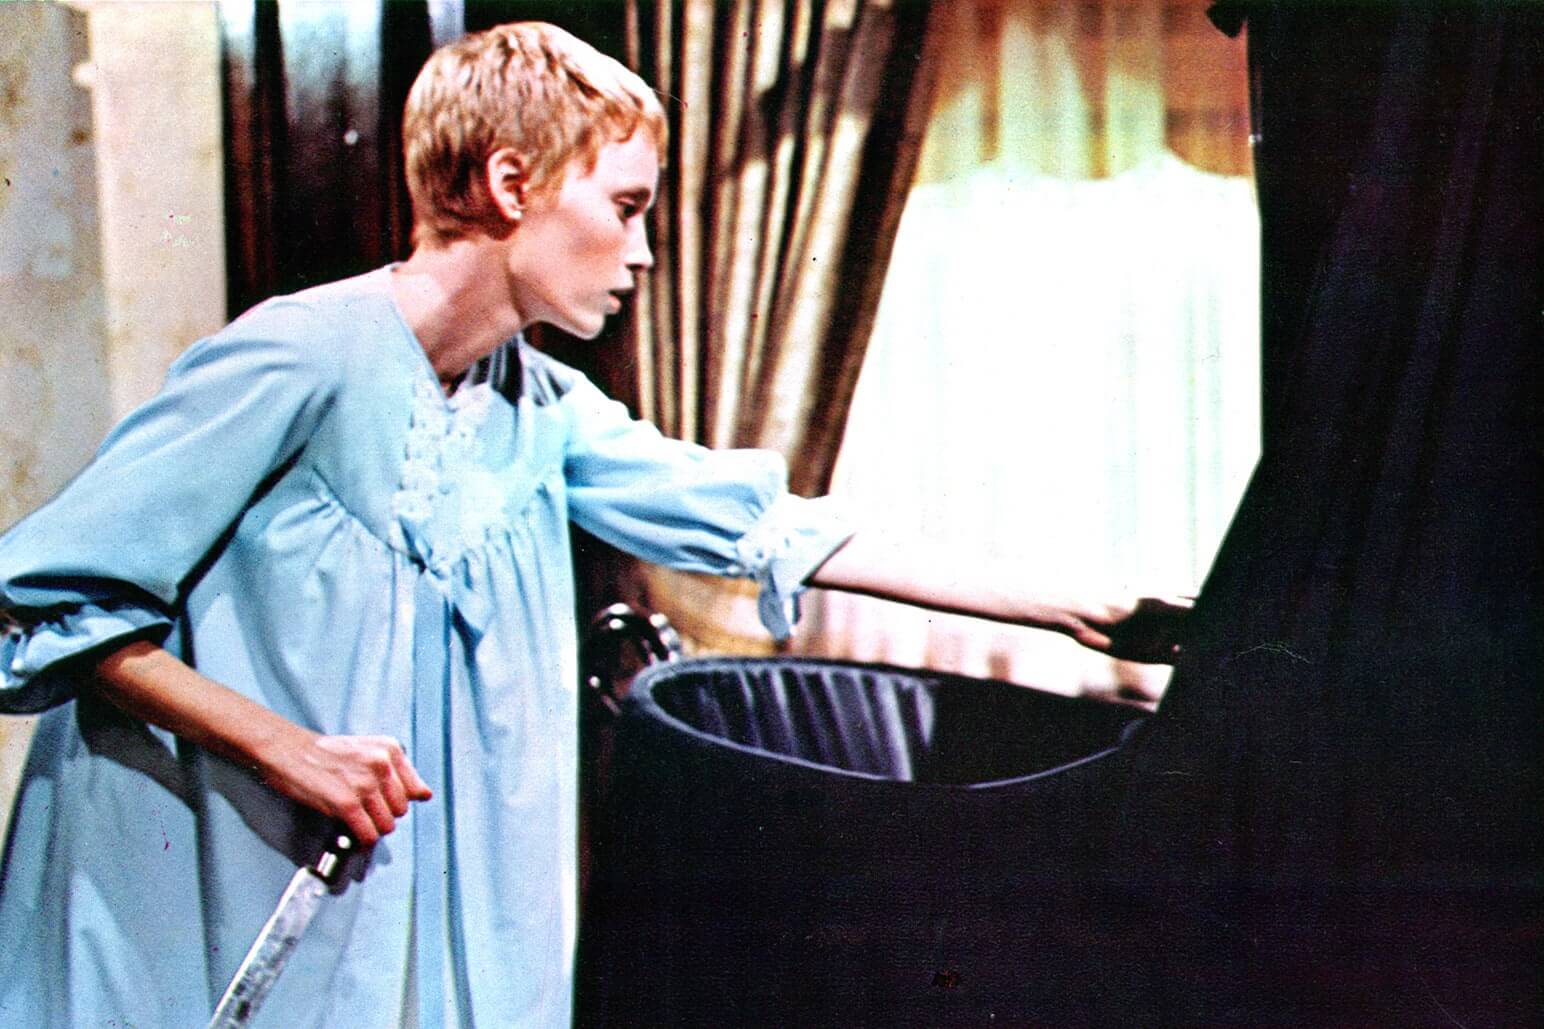 Rosemary's Baby mia farrow with a knife over the cradle